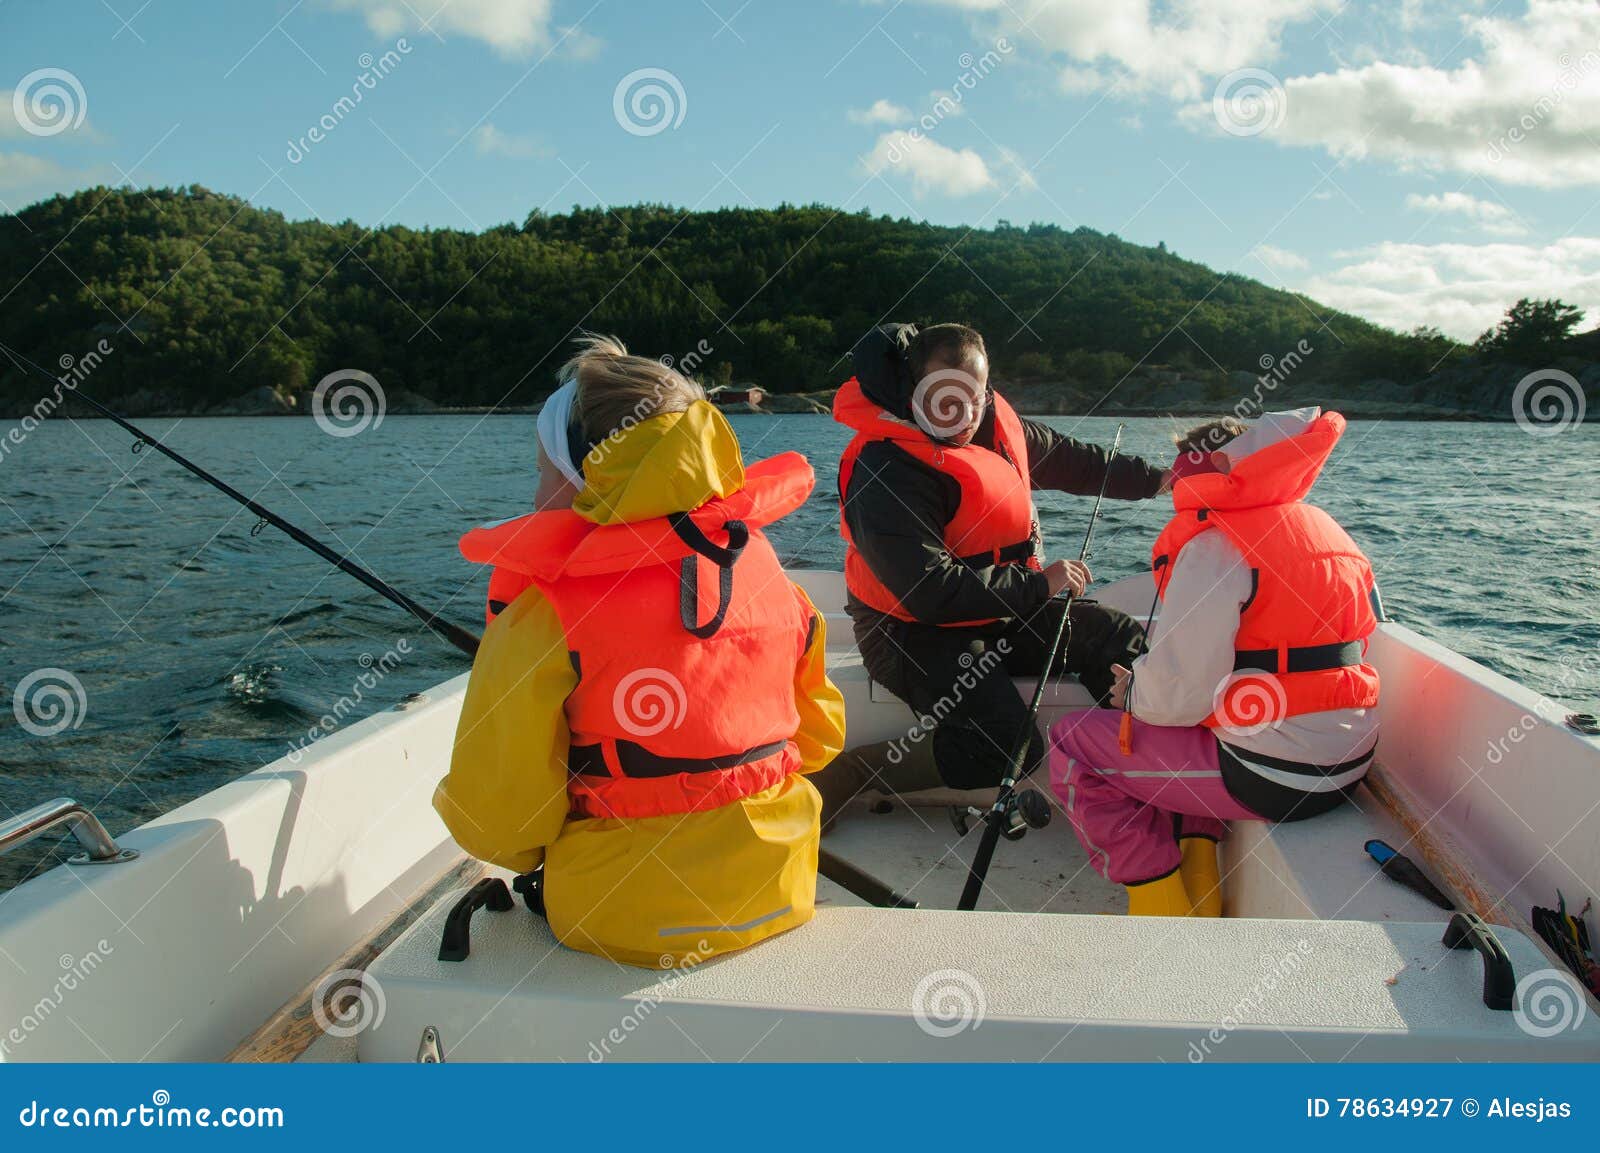 Father and Kids Fishing in a Boat Stock Image - Image of jacket, orange:  78634927